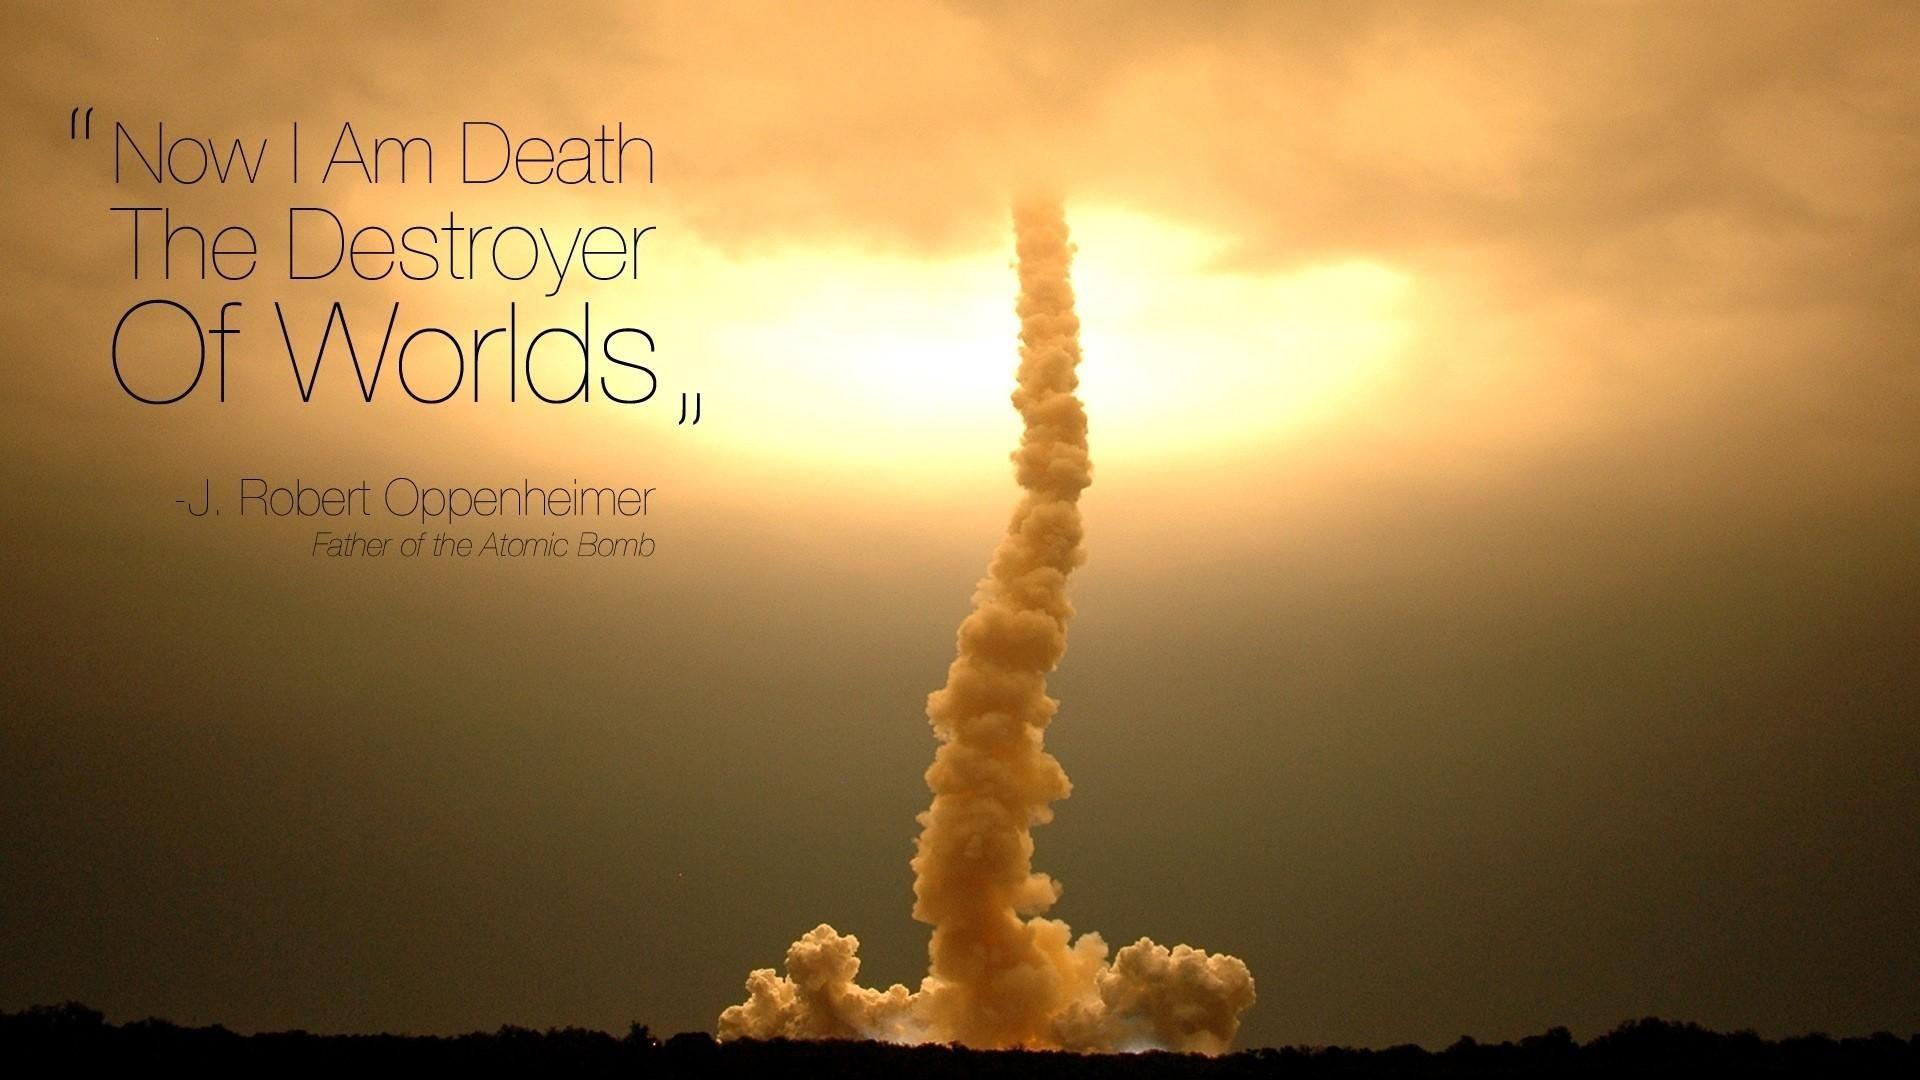 Quotes oppenheimer launch rocket skyscapes bhagavad gita wallpaper